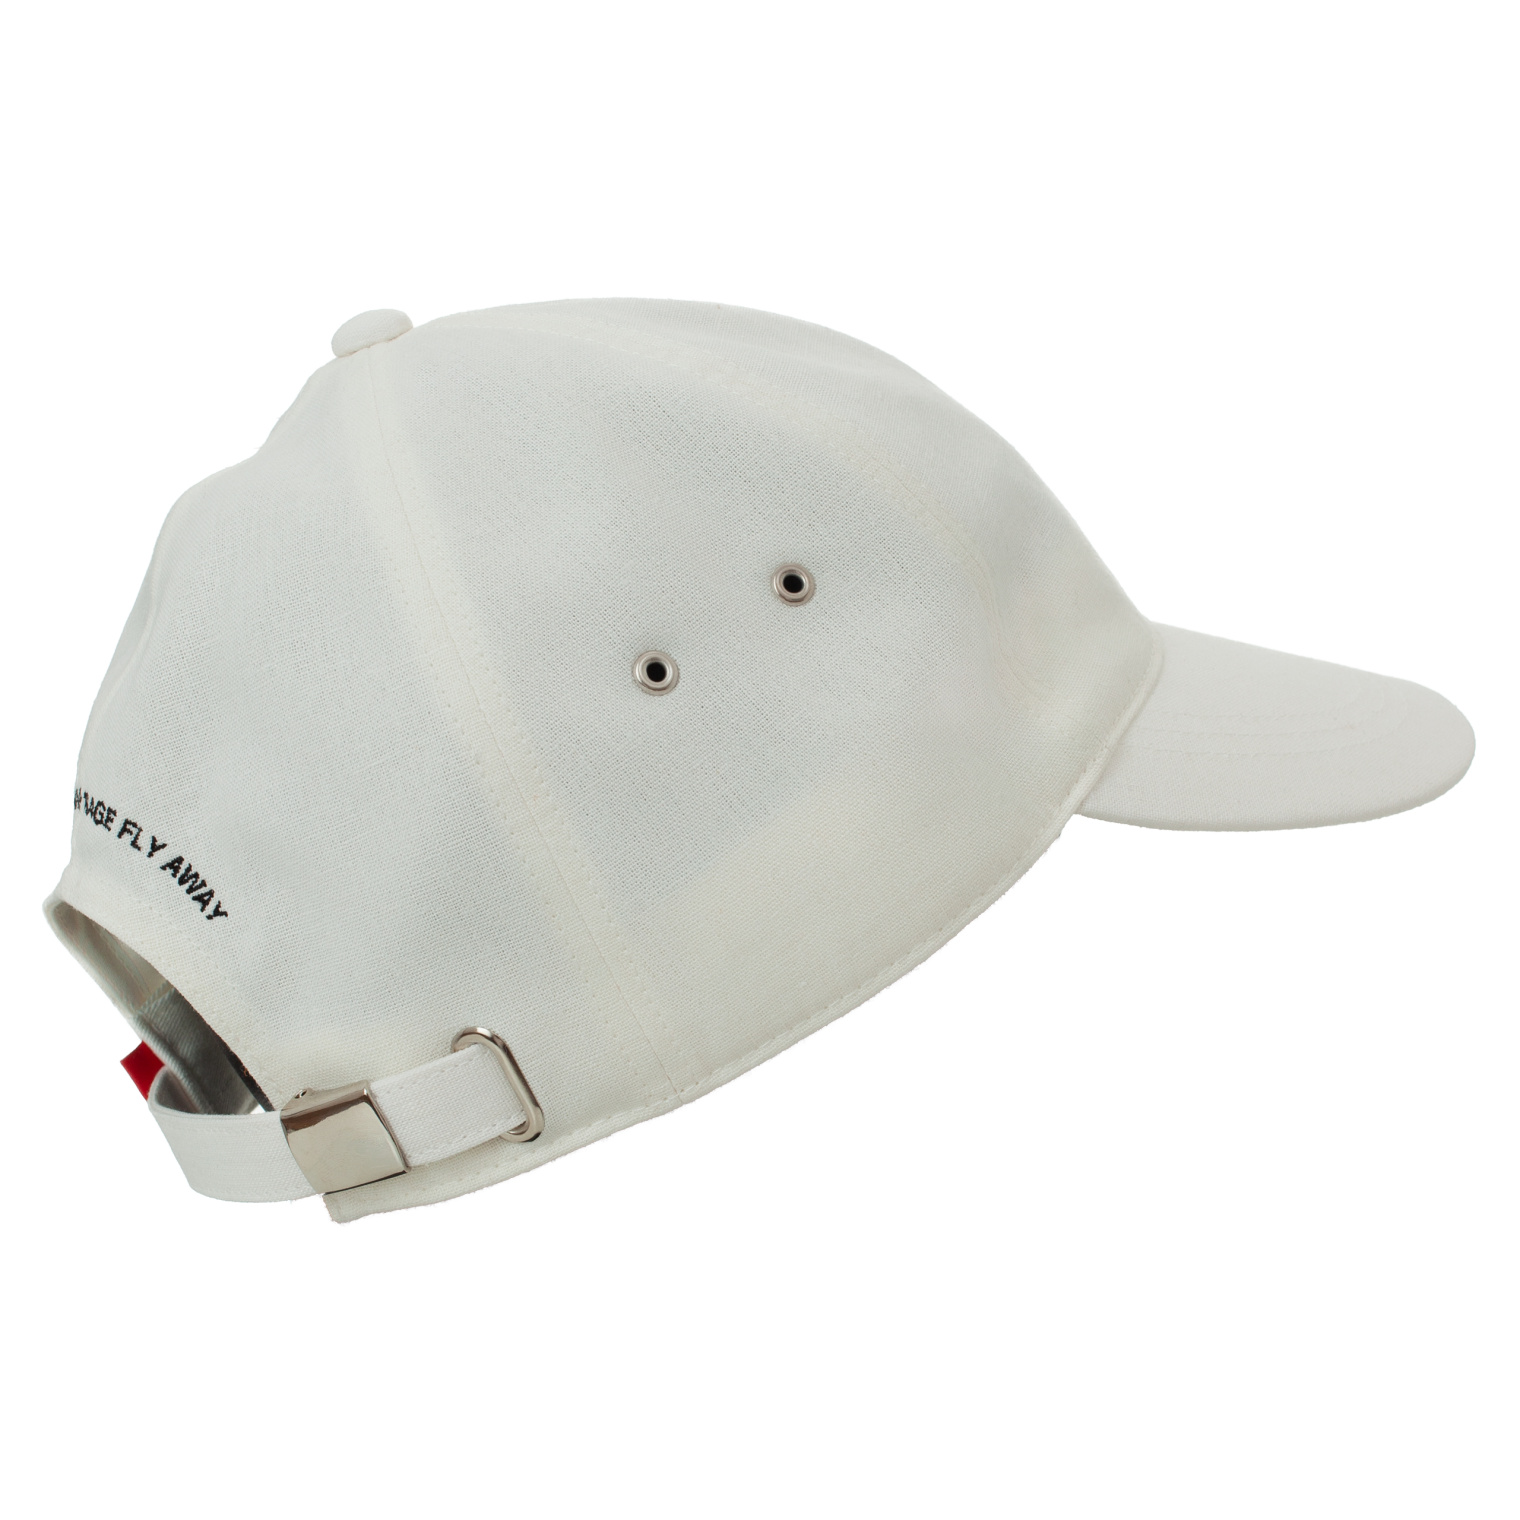 Undercover White embroidered cap